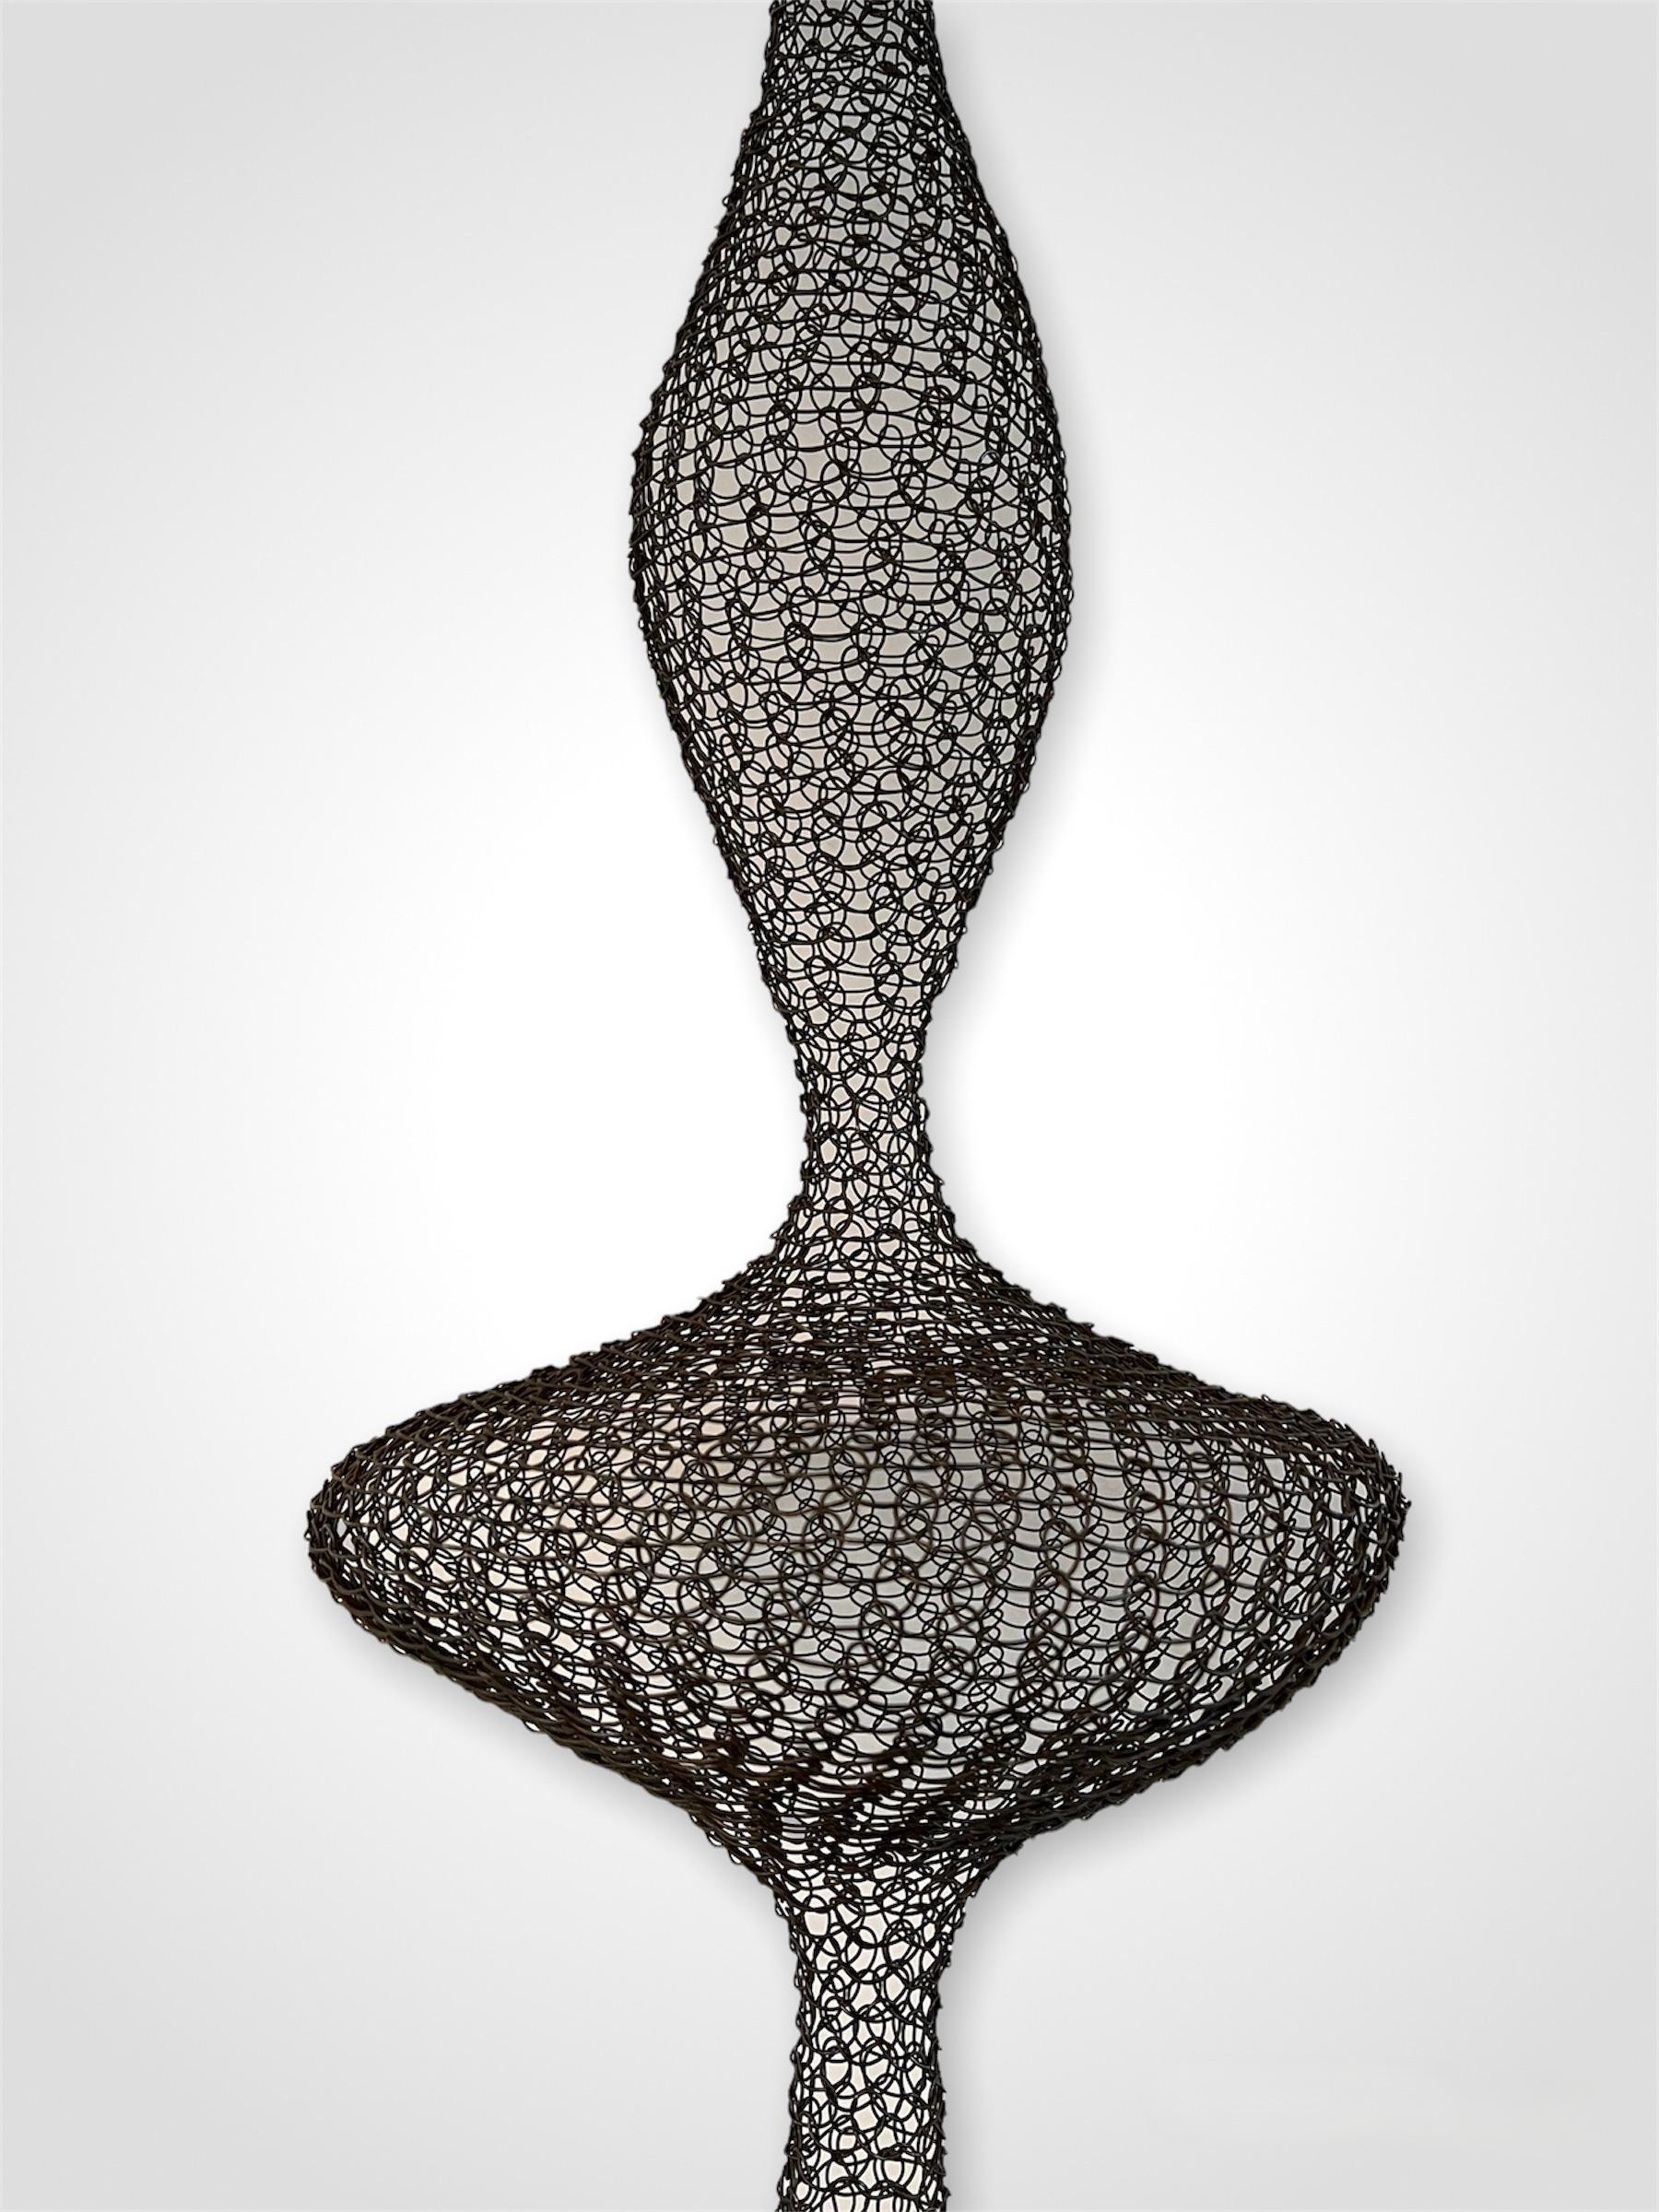 Organic hand woven mesh wire sculpture by Ulrikk Dufosse. Very collectable, from Paris, France.
